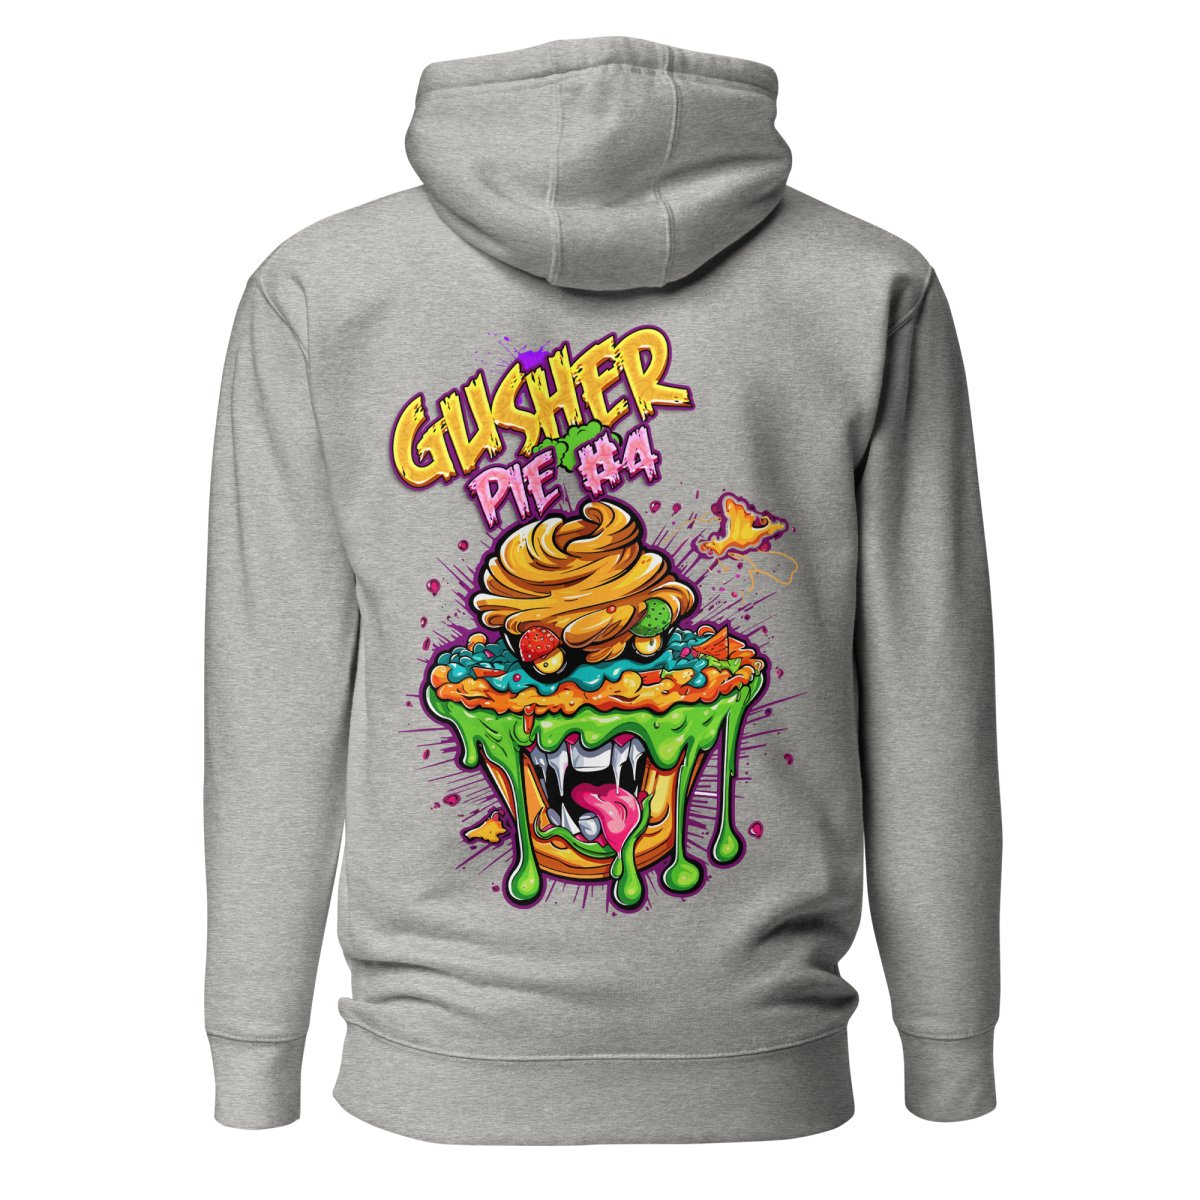 Gusher Pie #4 Hoodie - Mainly High